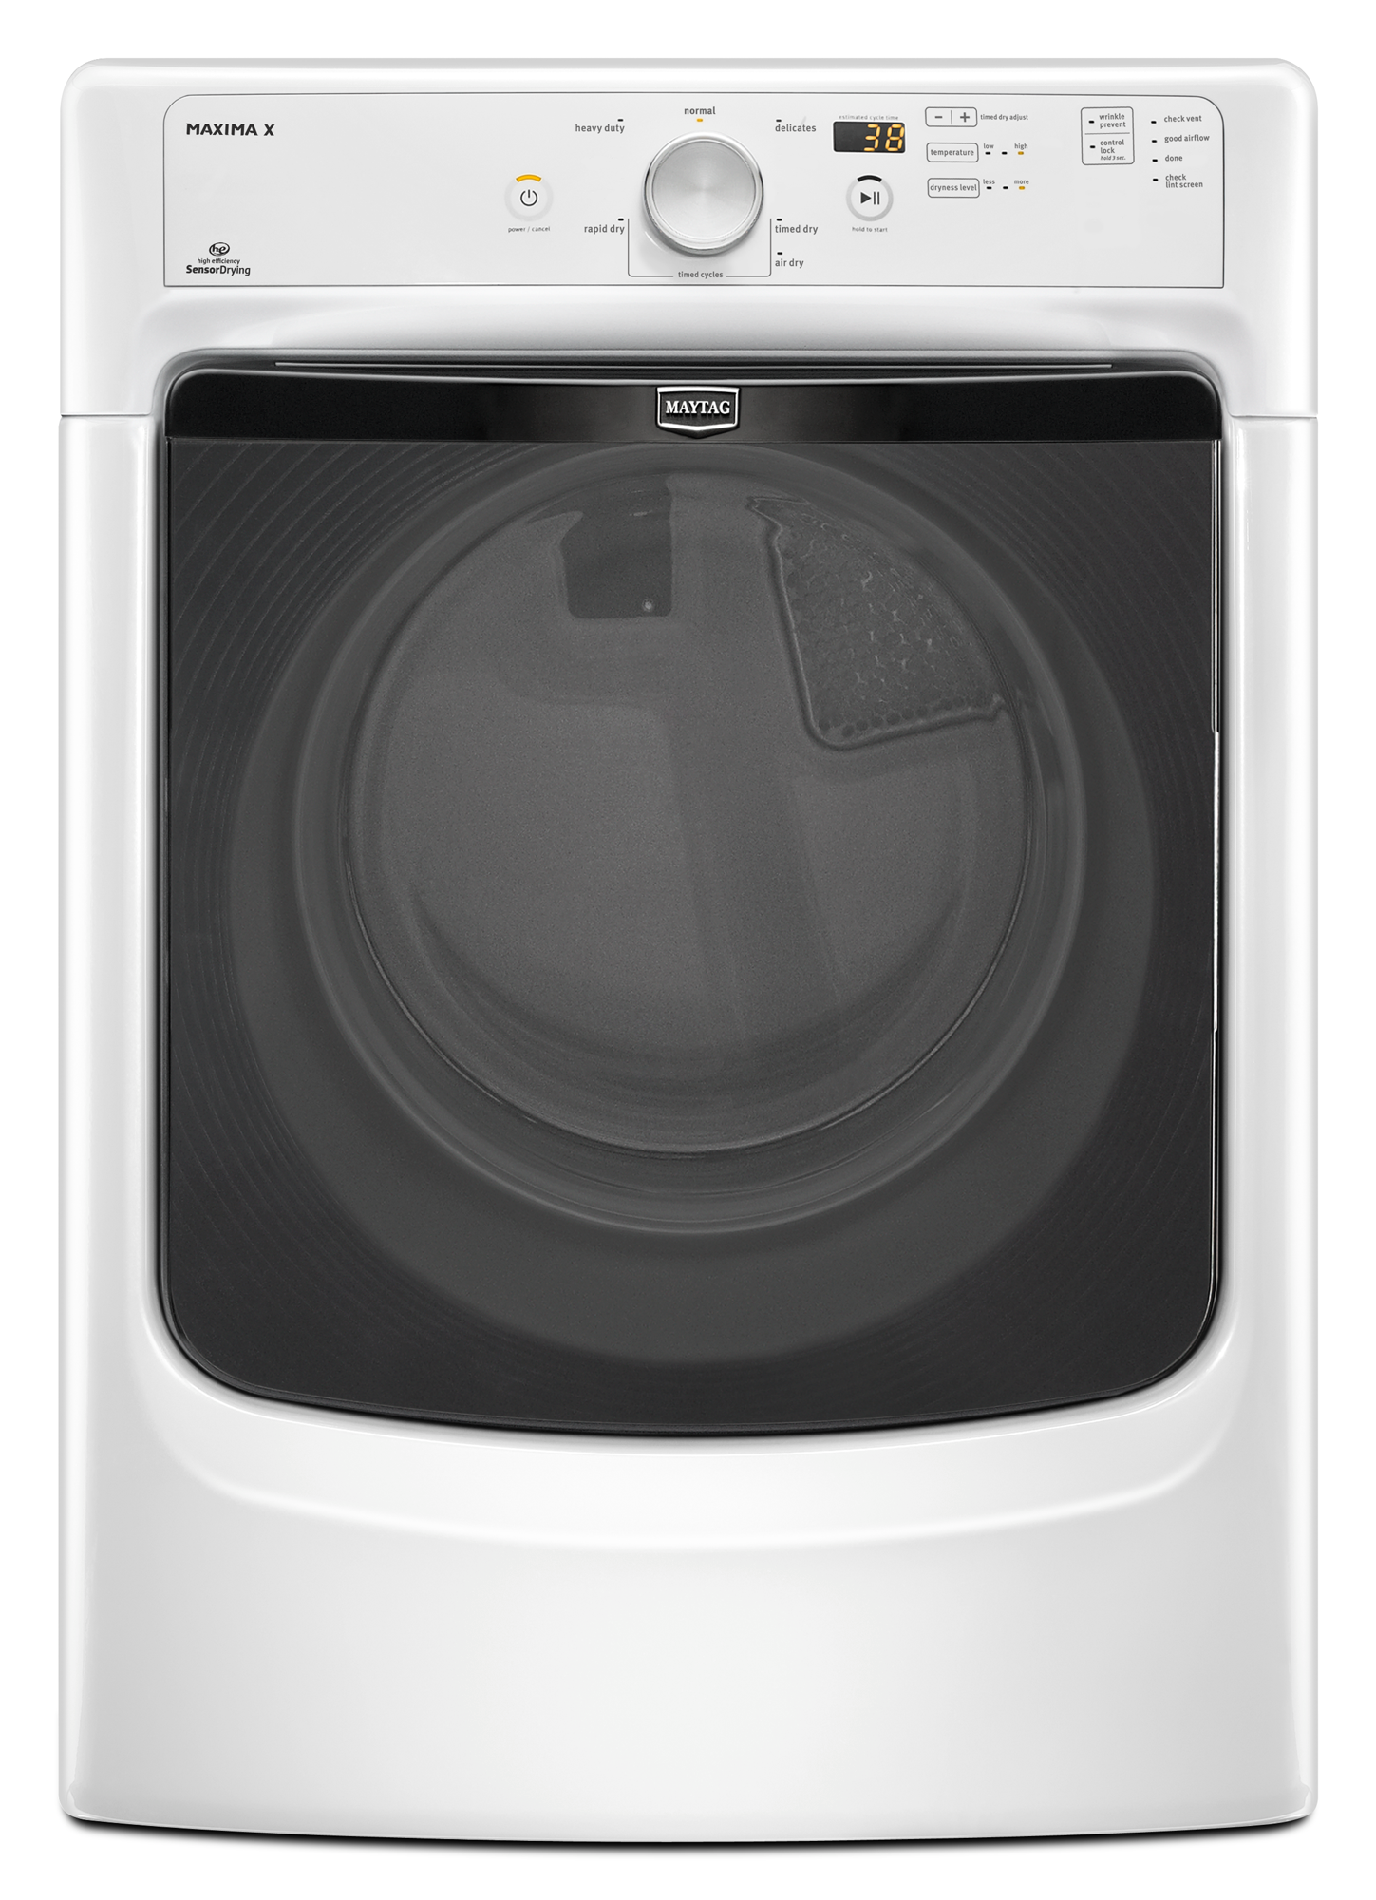 Maytag 7.4 cu. ft. Electric Dryer - White 7.0 cu. ft. and greater